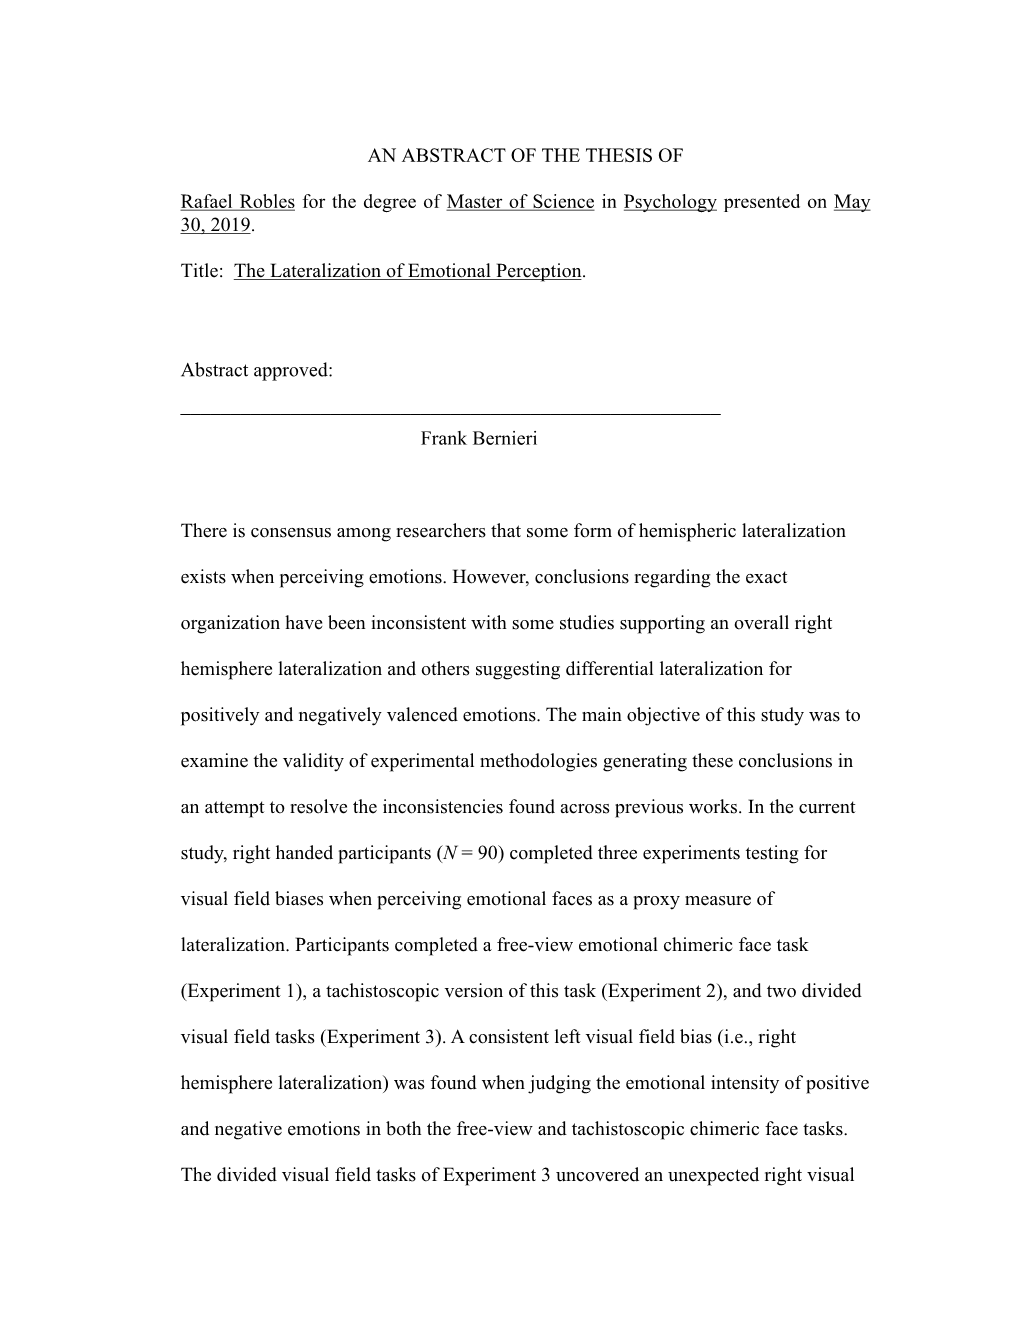 AN ABSTRACT of the THESIS of Rafael Robles for the Degree Of